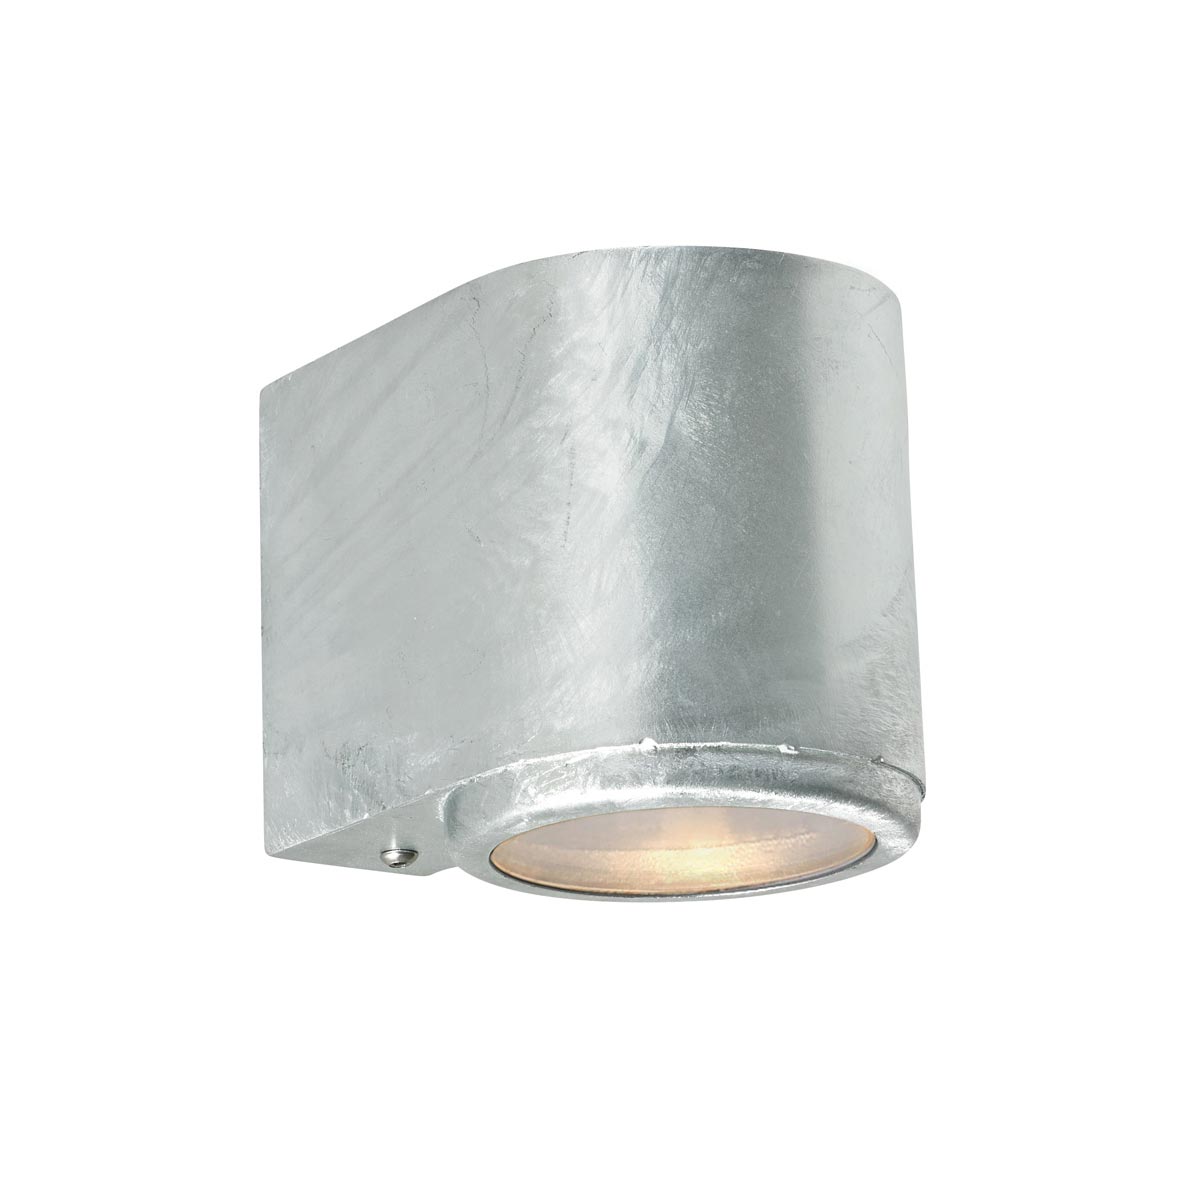 Norlys Mandal 1 Light Galvanised Outdoor Wall Down Light IP44